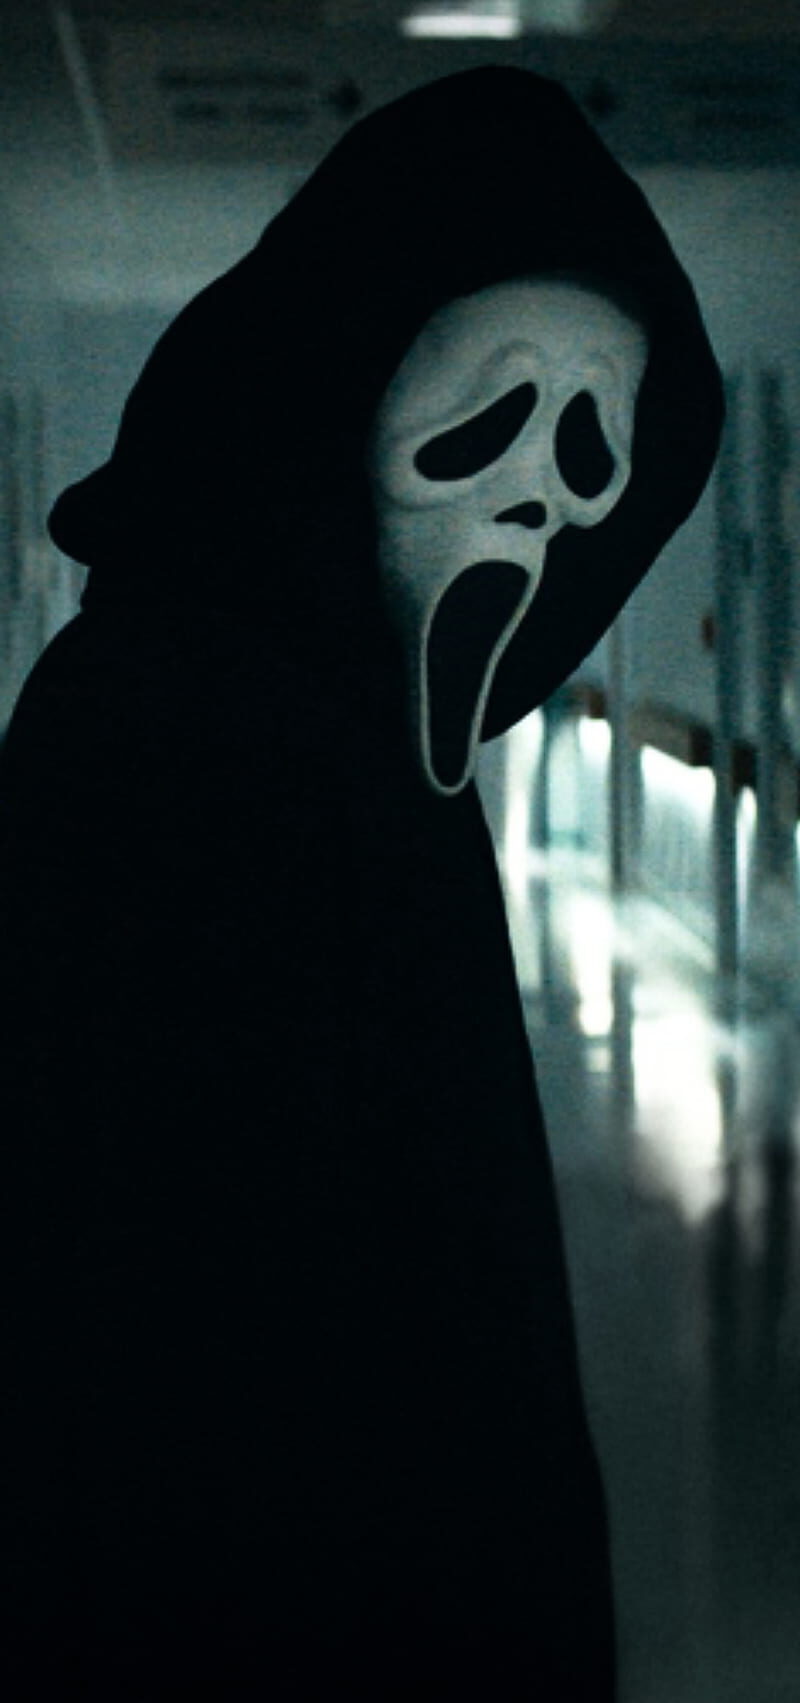 Ghostface Lover IPhone Wallpaper  IPhone Wallpapers  iPhone Wallpapers